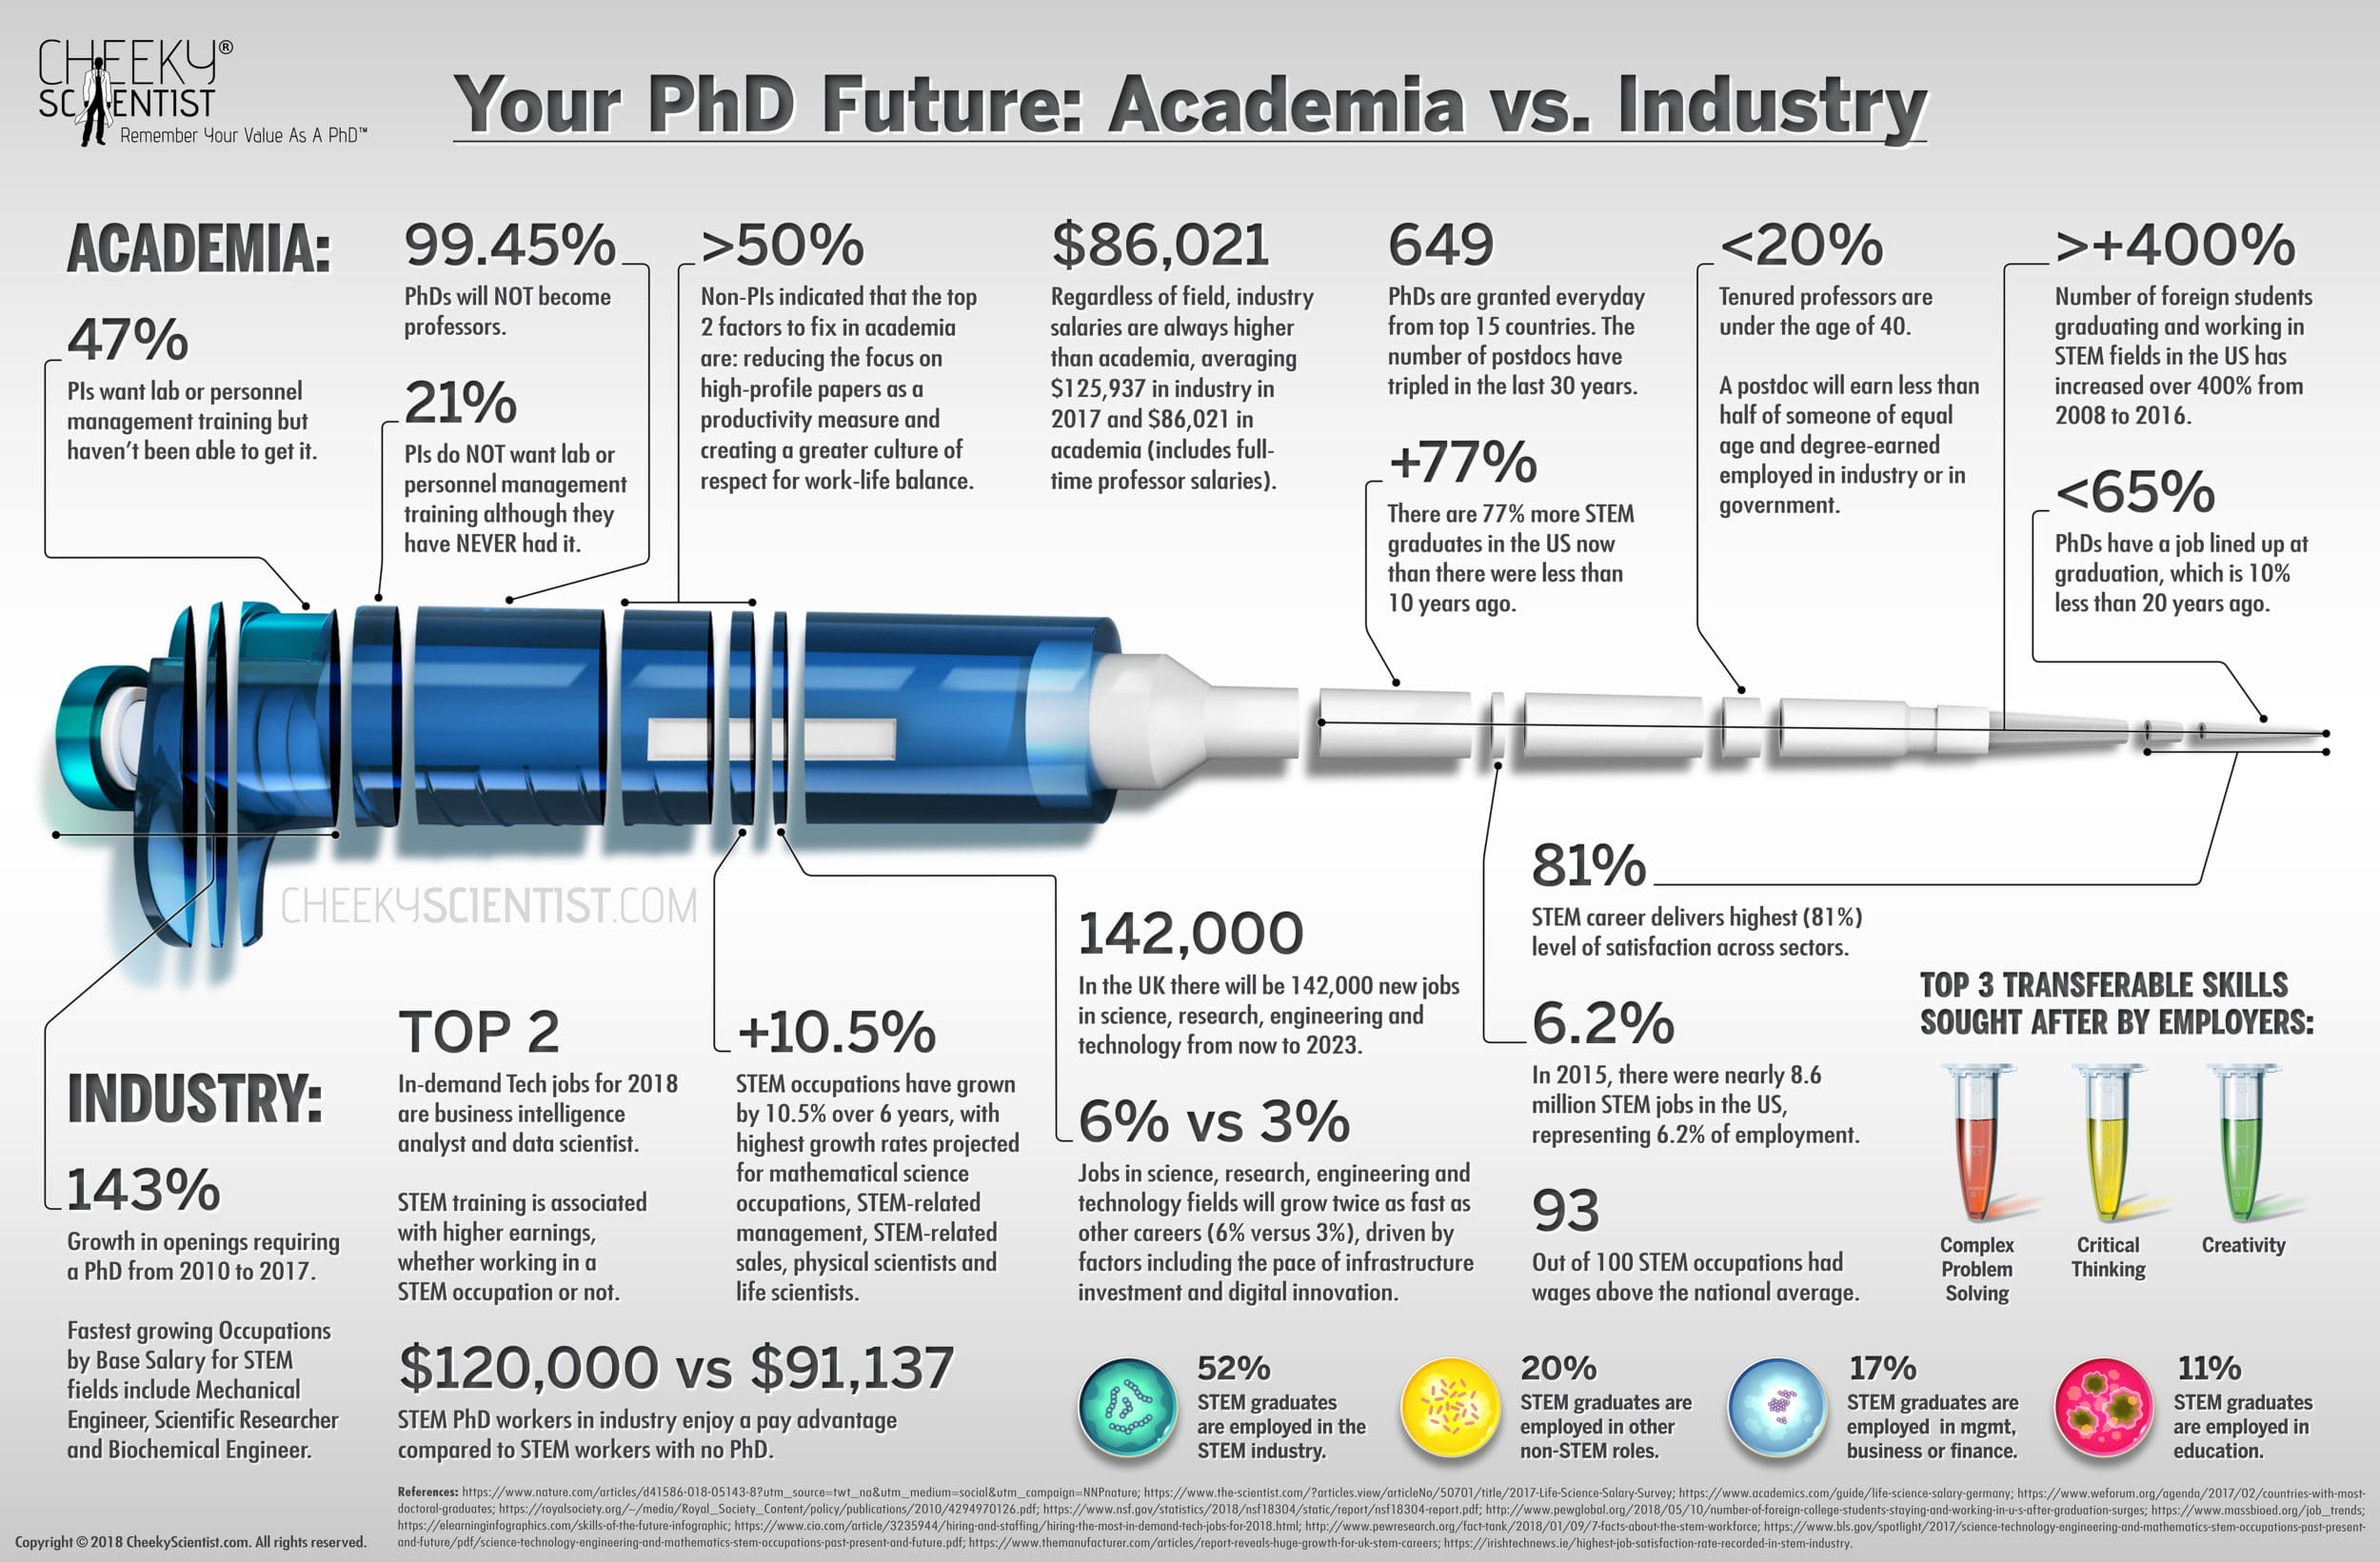 Which Future Do You Want? Scarcity In Academia Or Abundance In Industry?